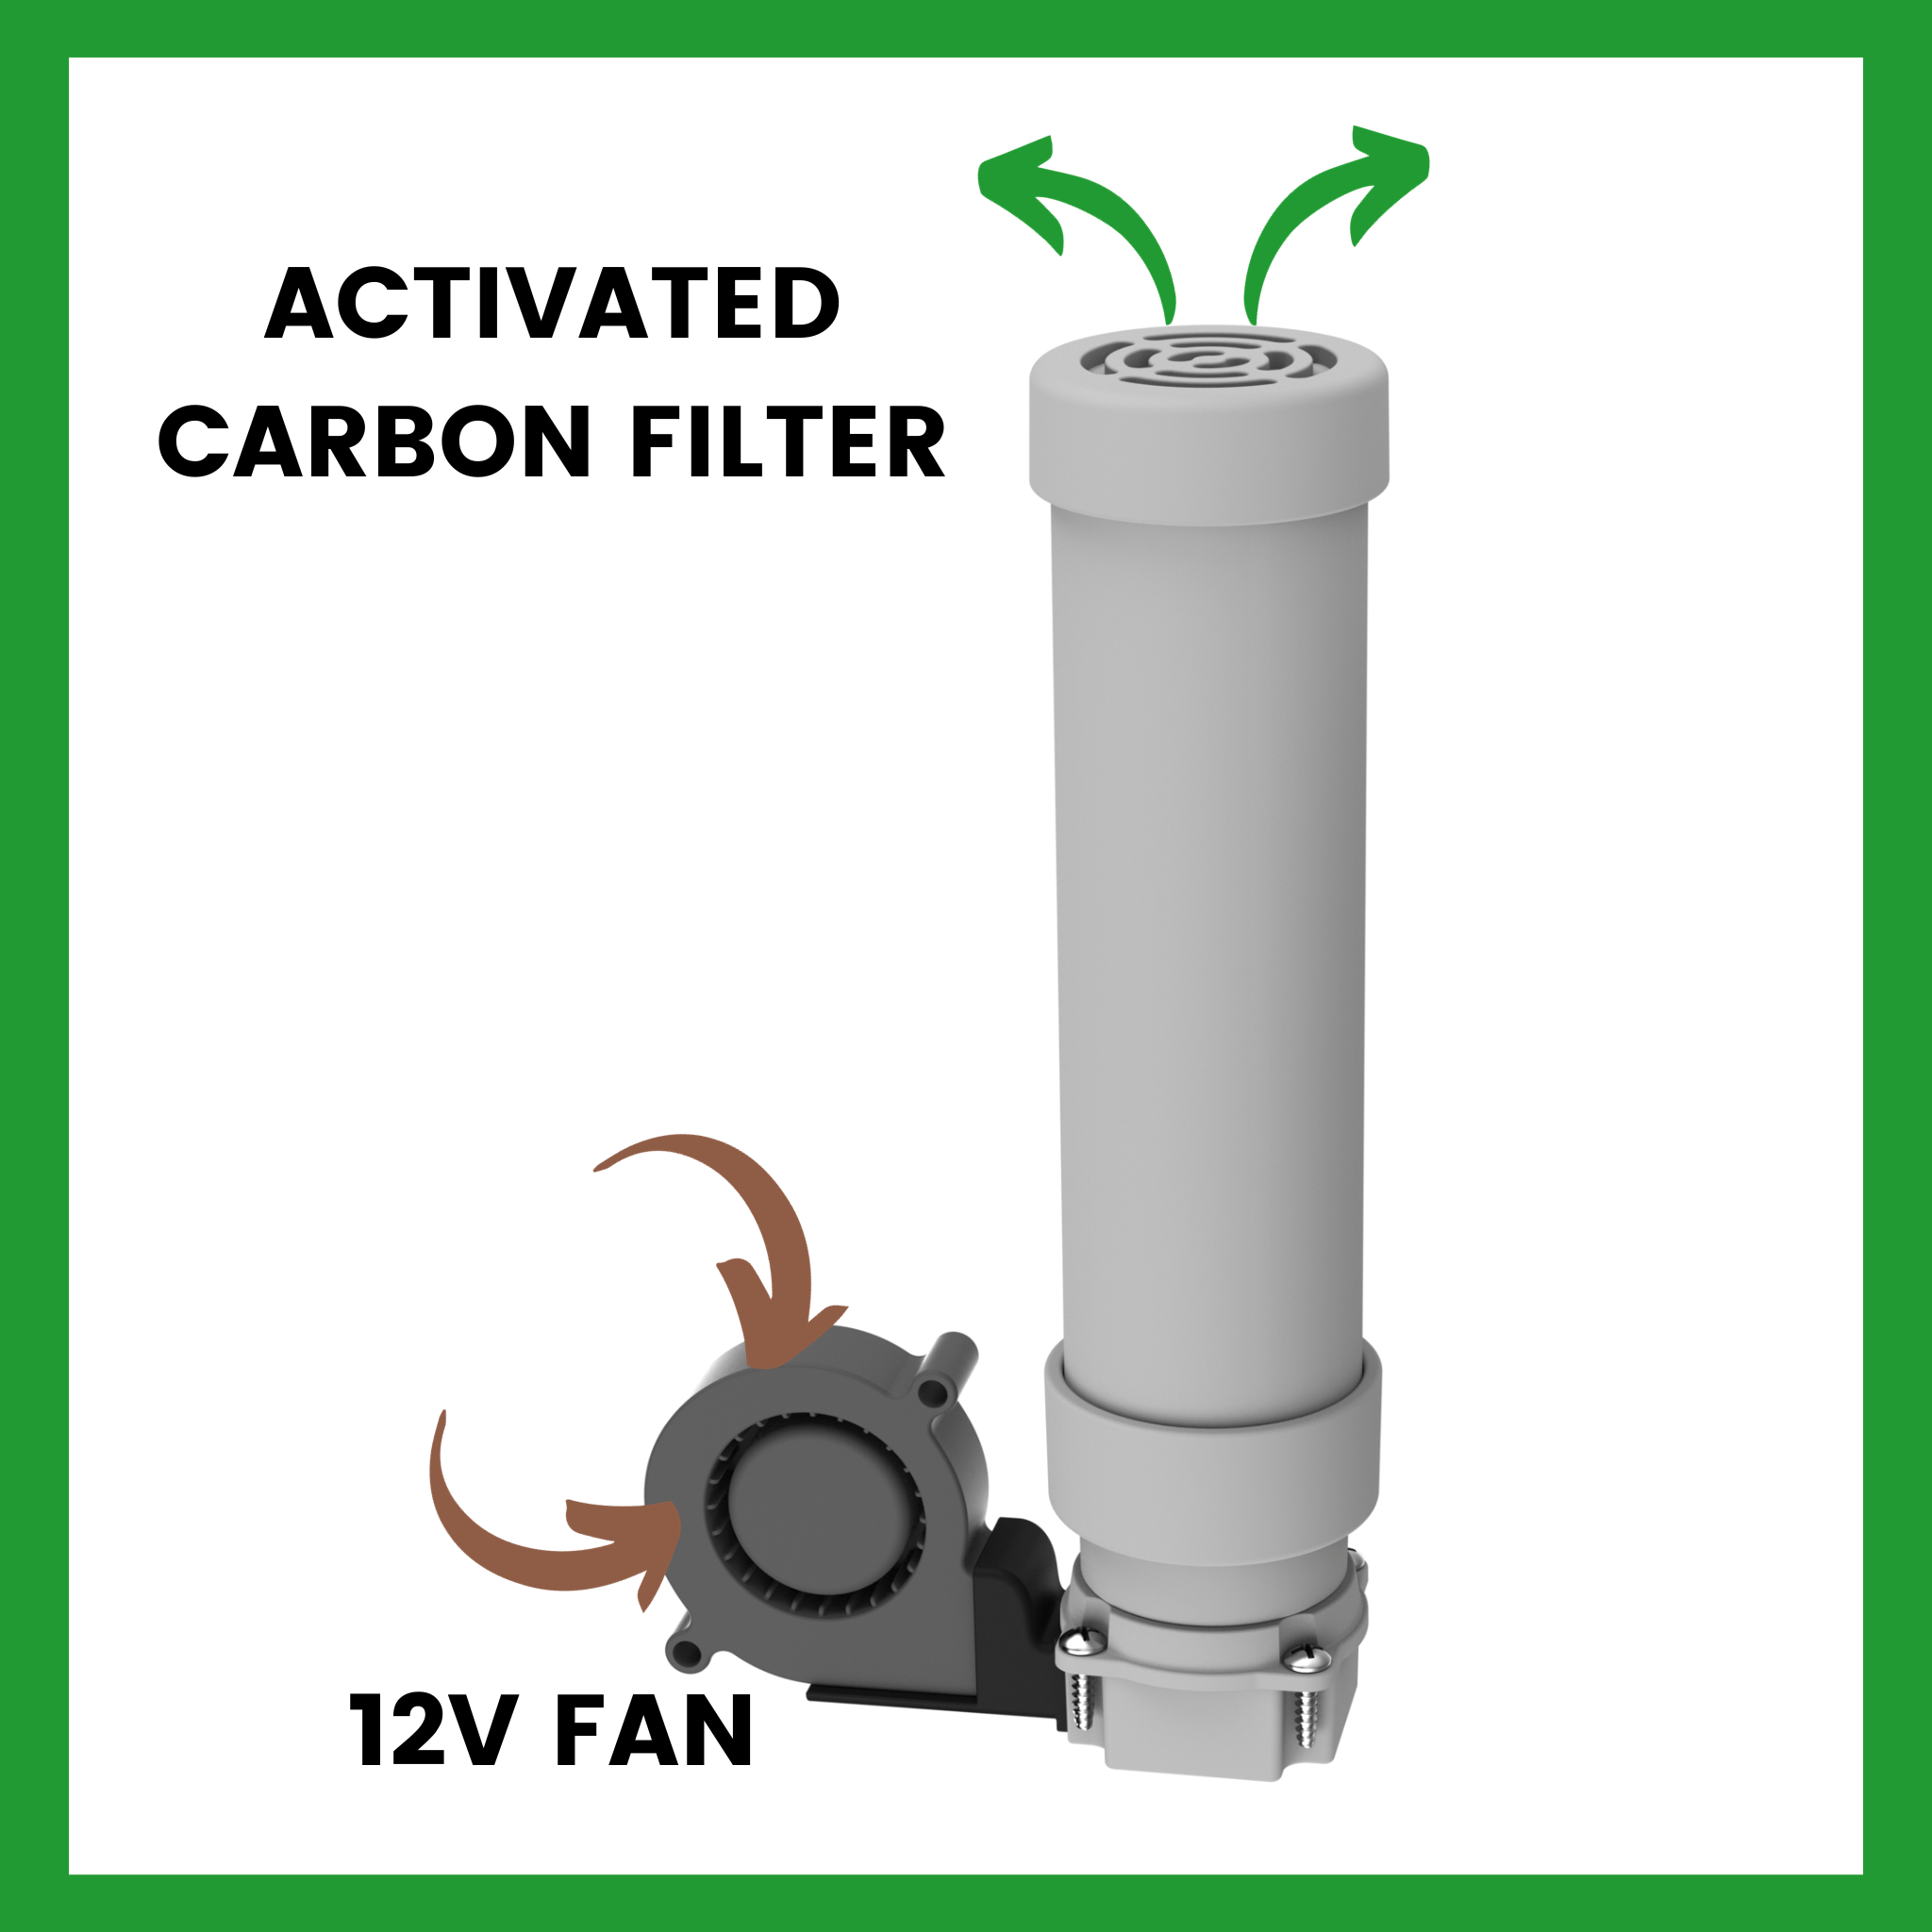 Activated Carbon filter and fan to reduce odors in your composting toilet.